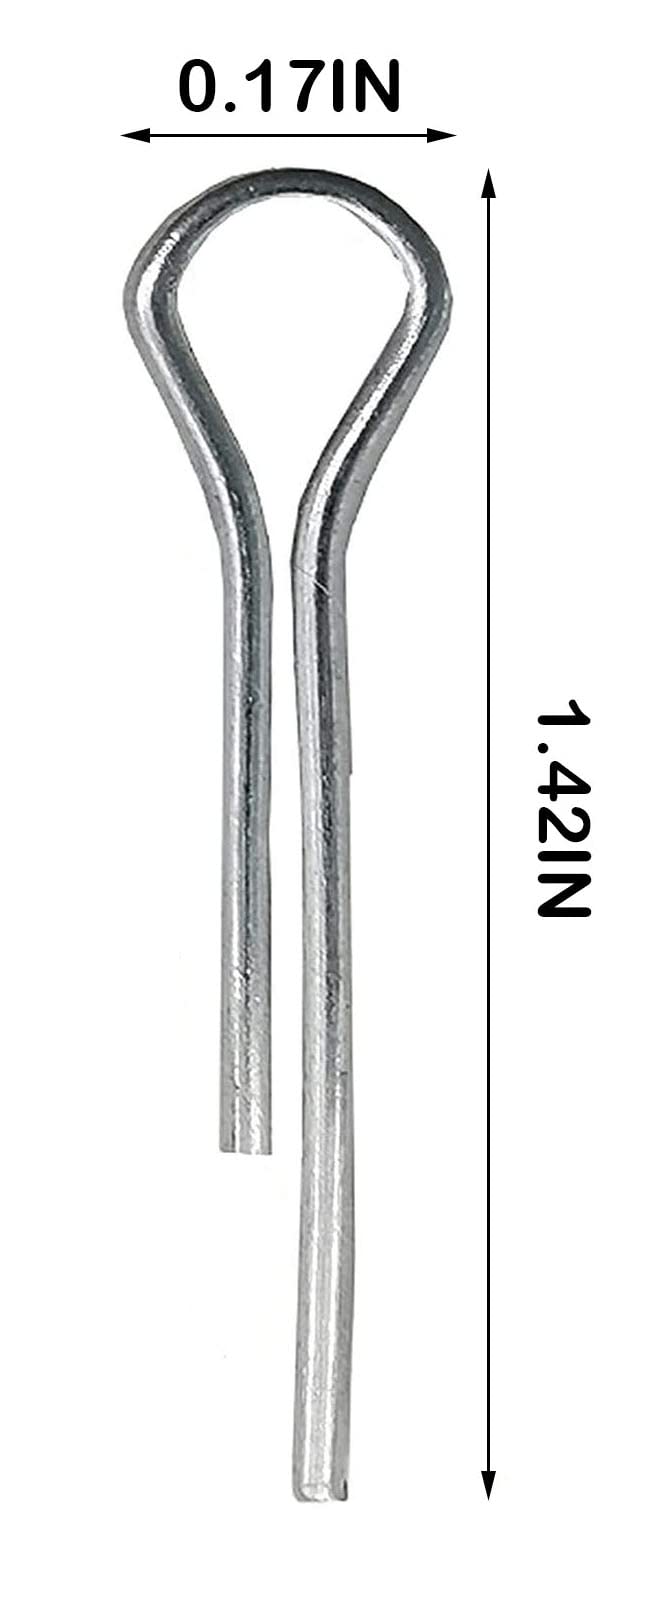 neryera (30pack) Replacement 703063, 1668344, 1686806yp Simplicity or Snapper Shear Pins for John Deere Snow Thrower